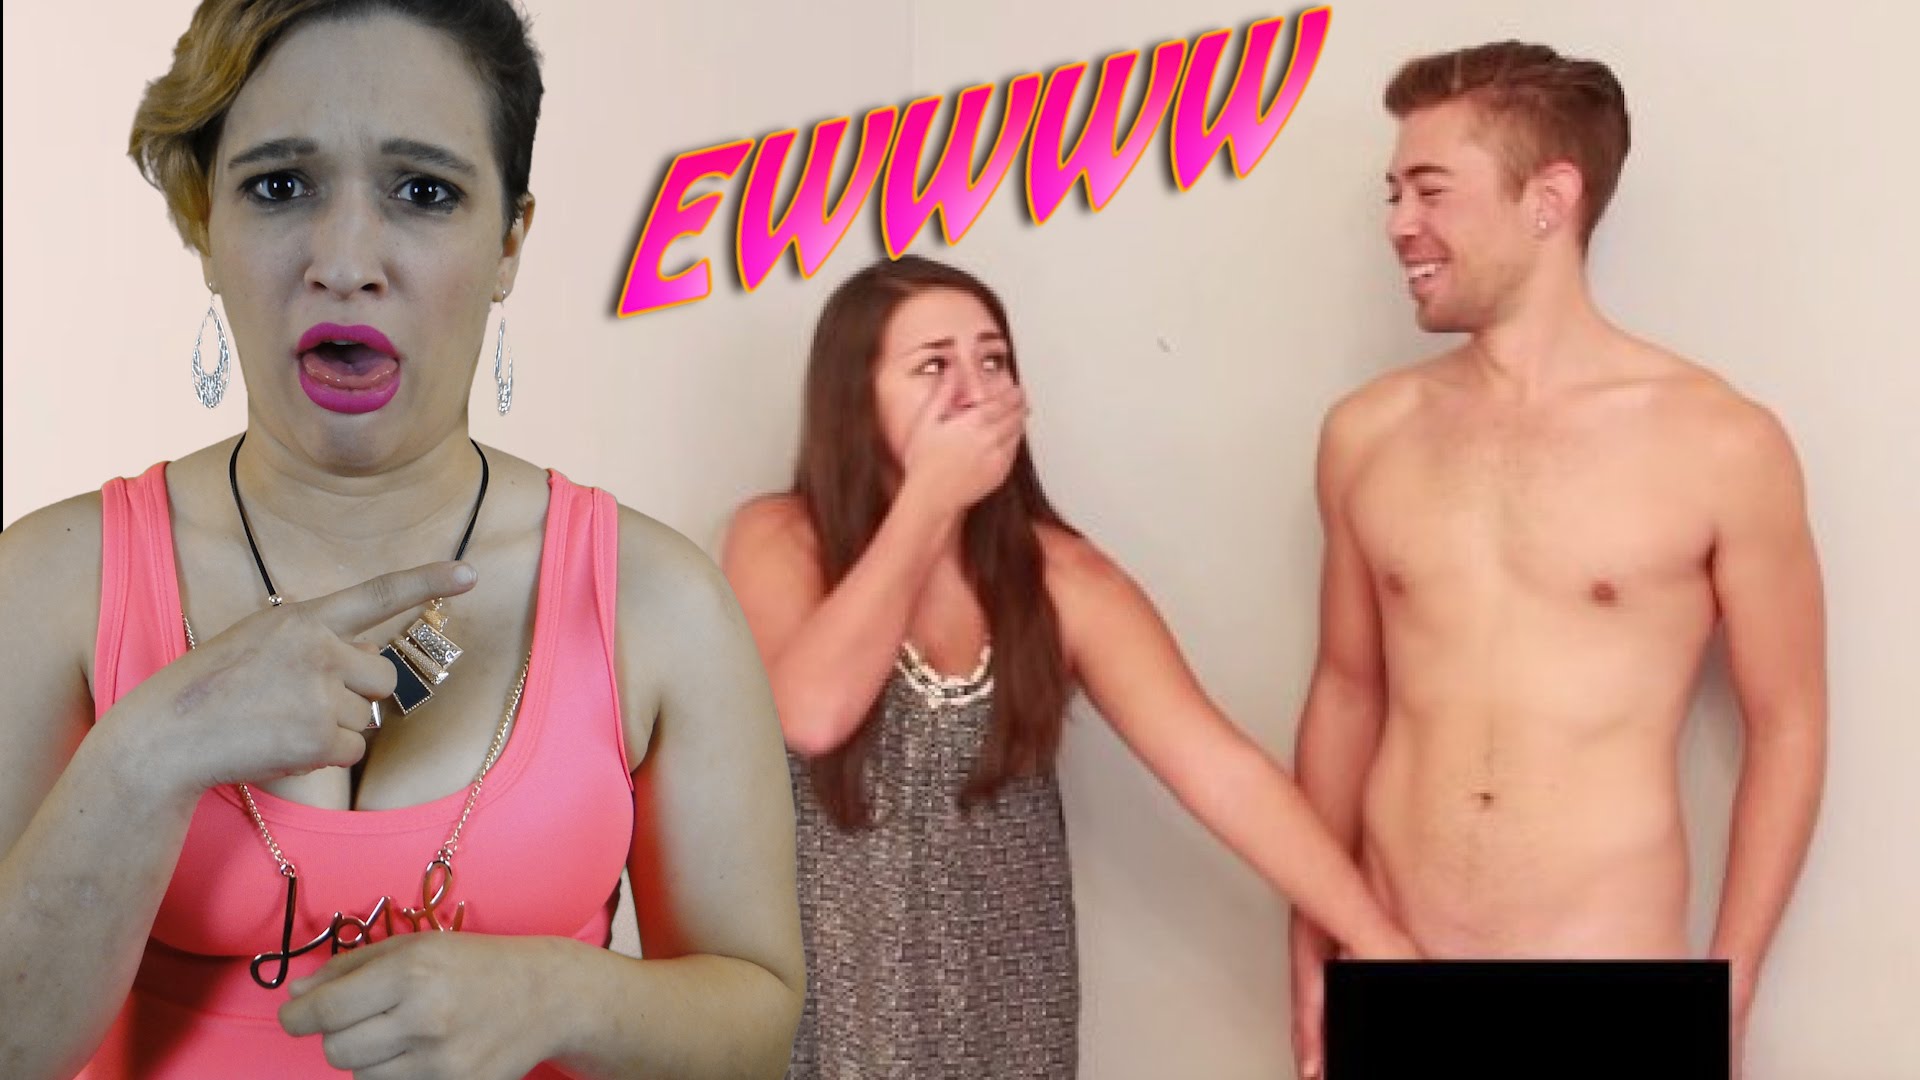 lesbians touch a penis for the first time reaction youtube.